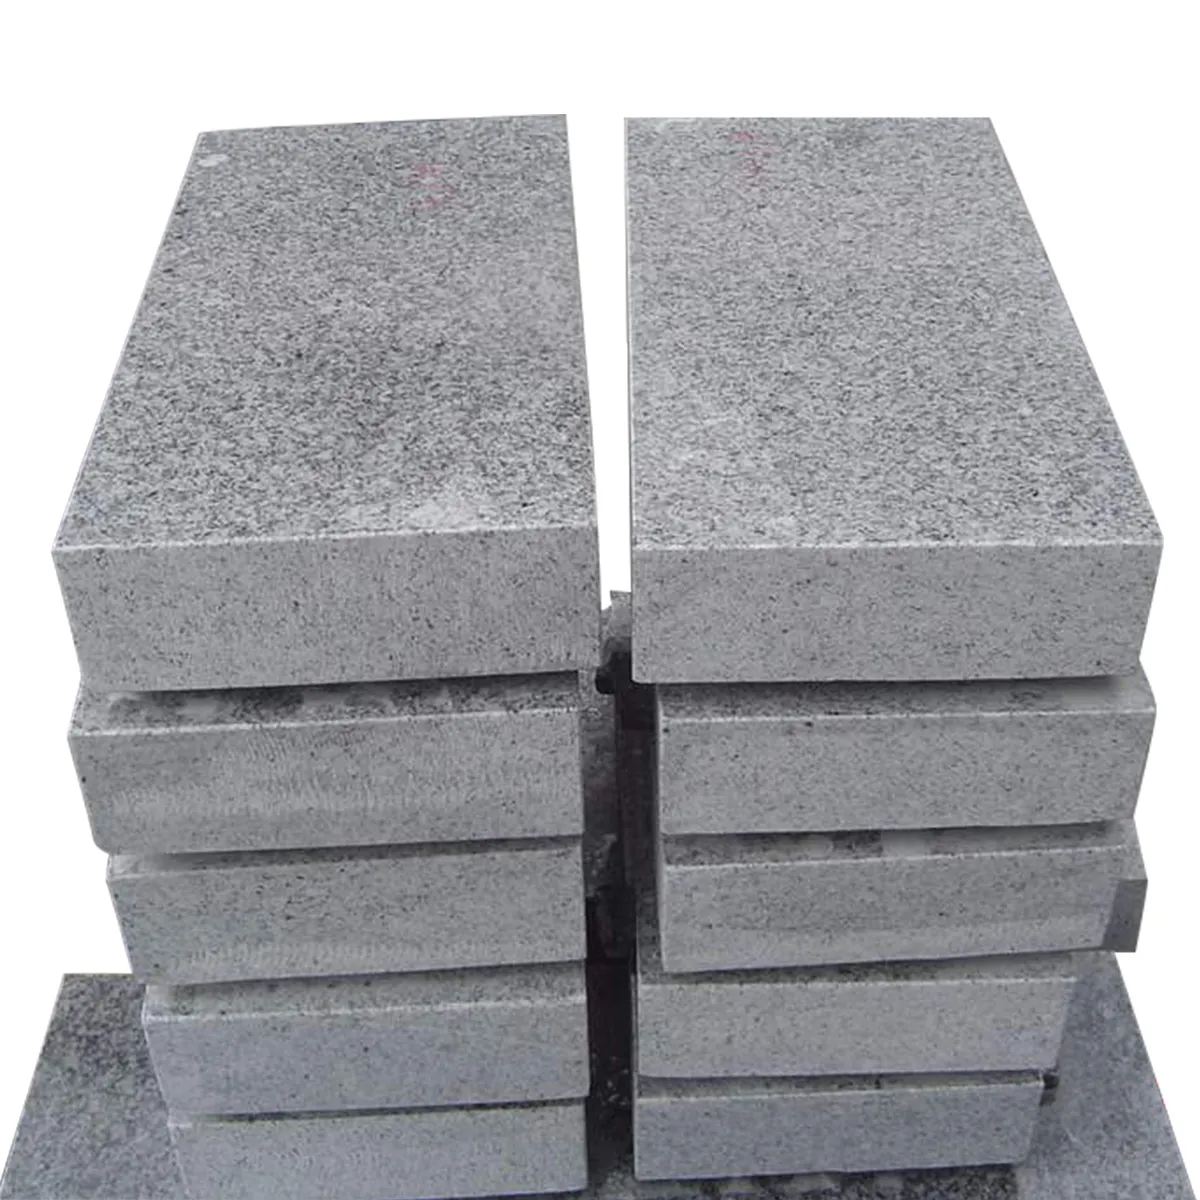 Popular Products of Markers Modern Grave Monuments Black and Grey Natural Granite Memorial Stone Slabs Headstones For Graves